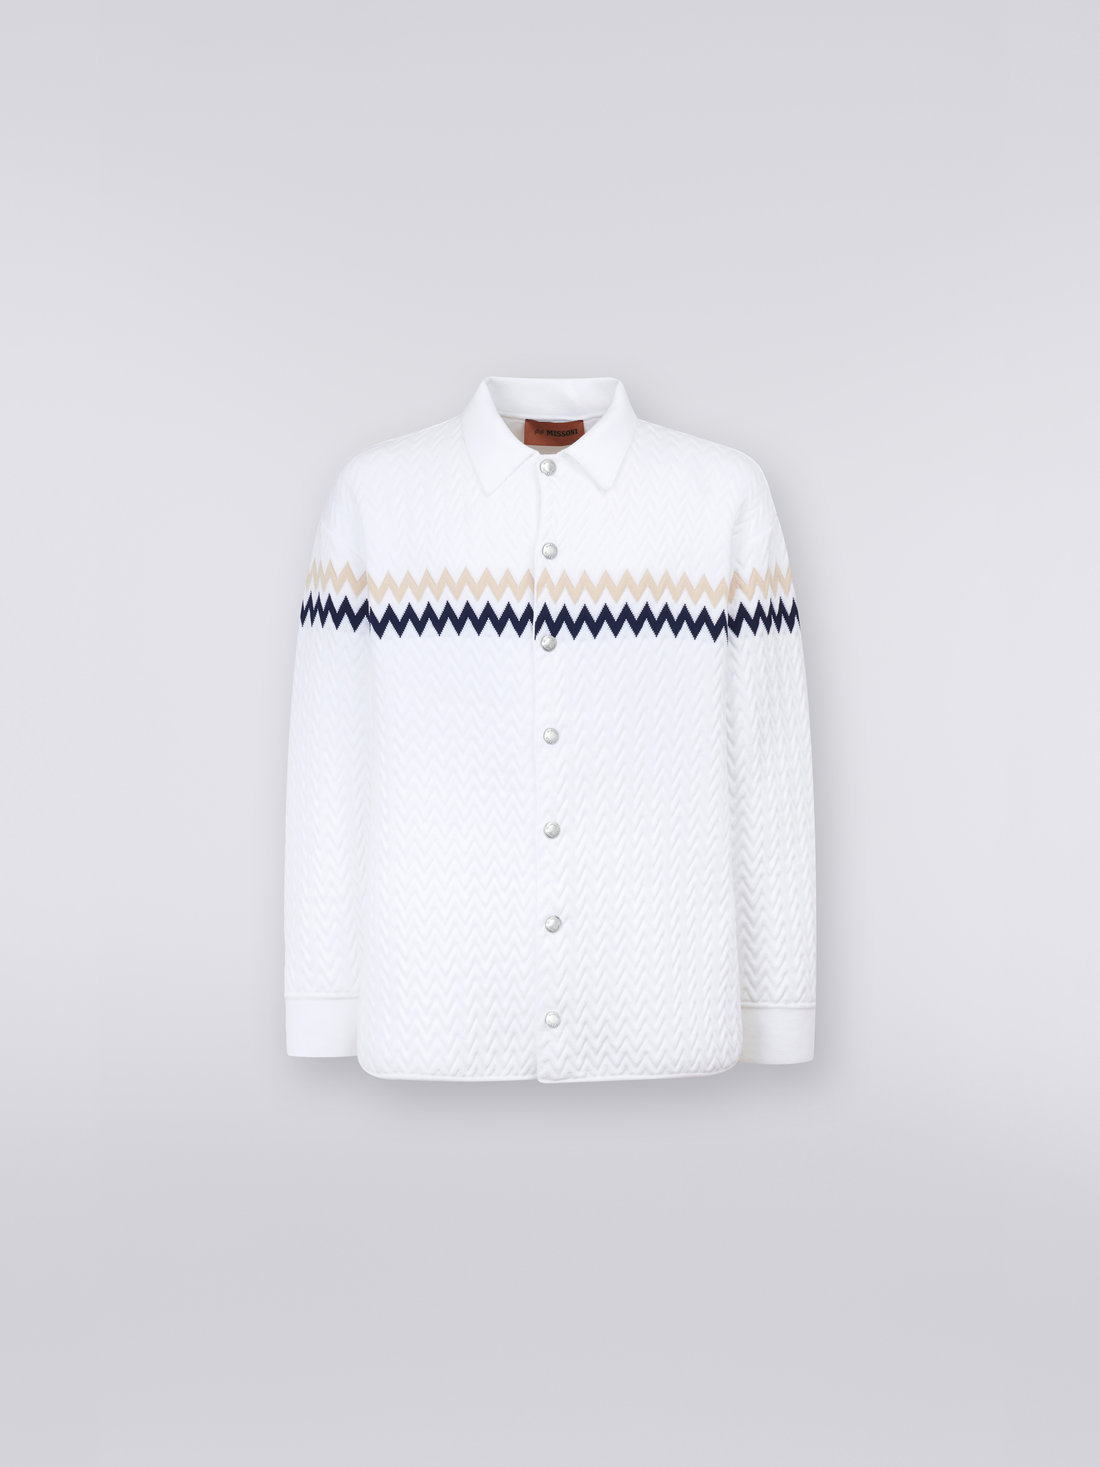 Nylon-blend overshirt with zigzag stitching and contrasting details, White, Beige & Blue - US23SC06BK020TS0173 - 0